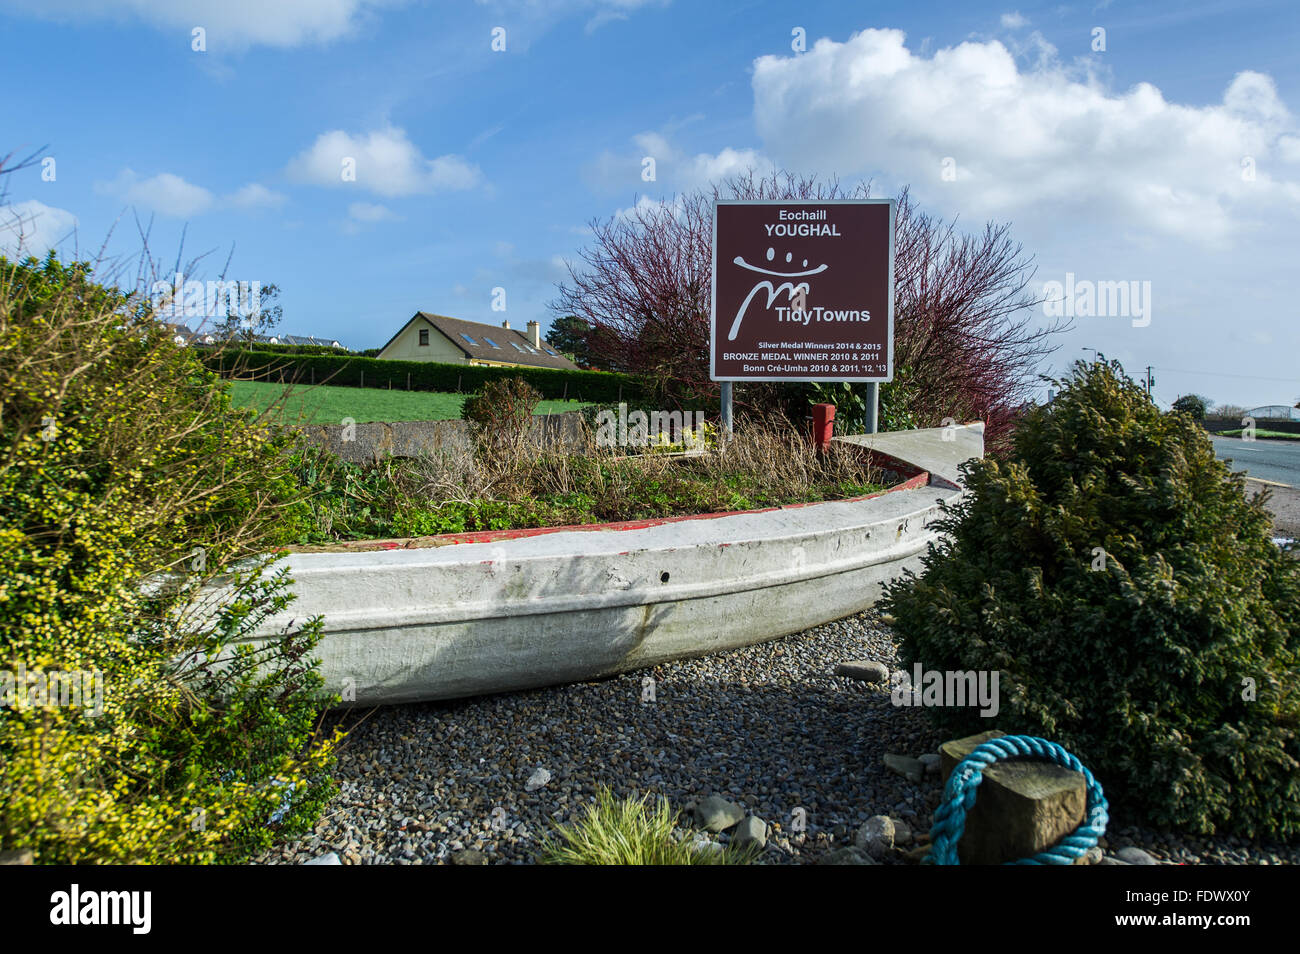 Youghal Tidy Towns sign with a boat full of flowers and plants, just outside Youghal, Co Cork, Ireland Stock Photo